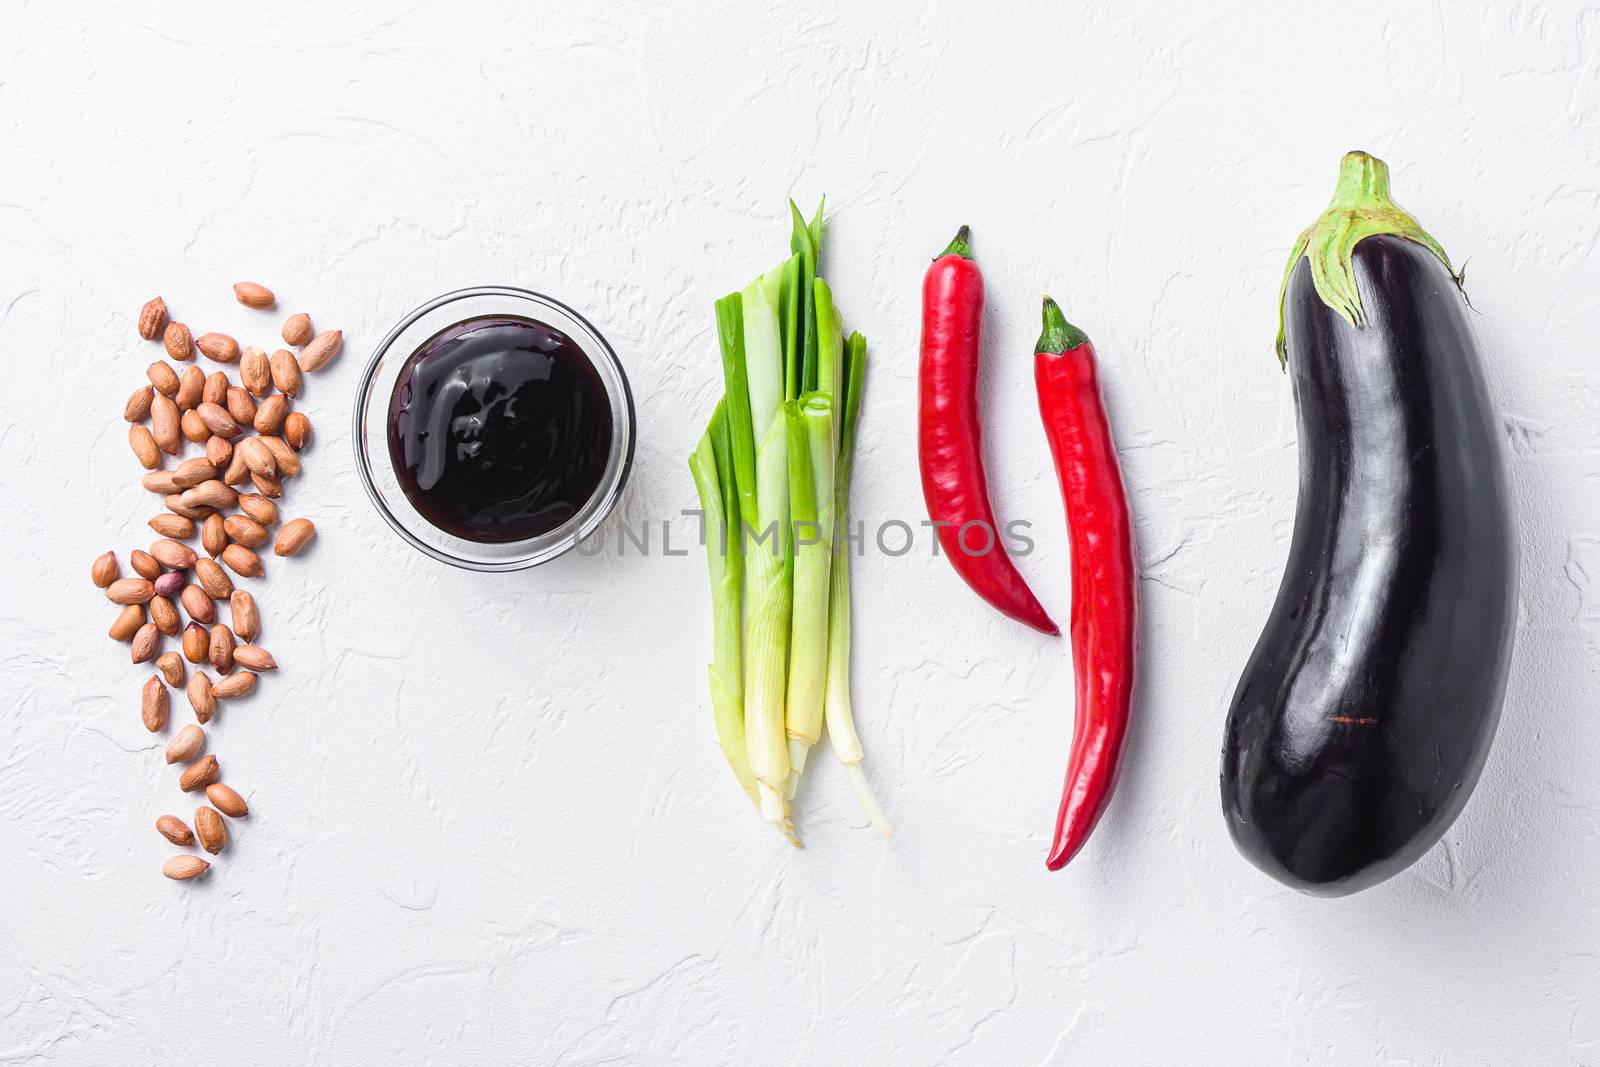 Ripe aubergine ingredients, for cooking or grill chili pepper, eggplant, sauce, nuts on white background top view. by Ilianesolenyi